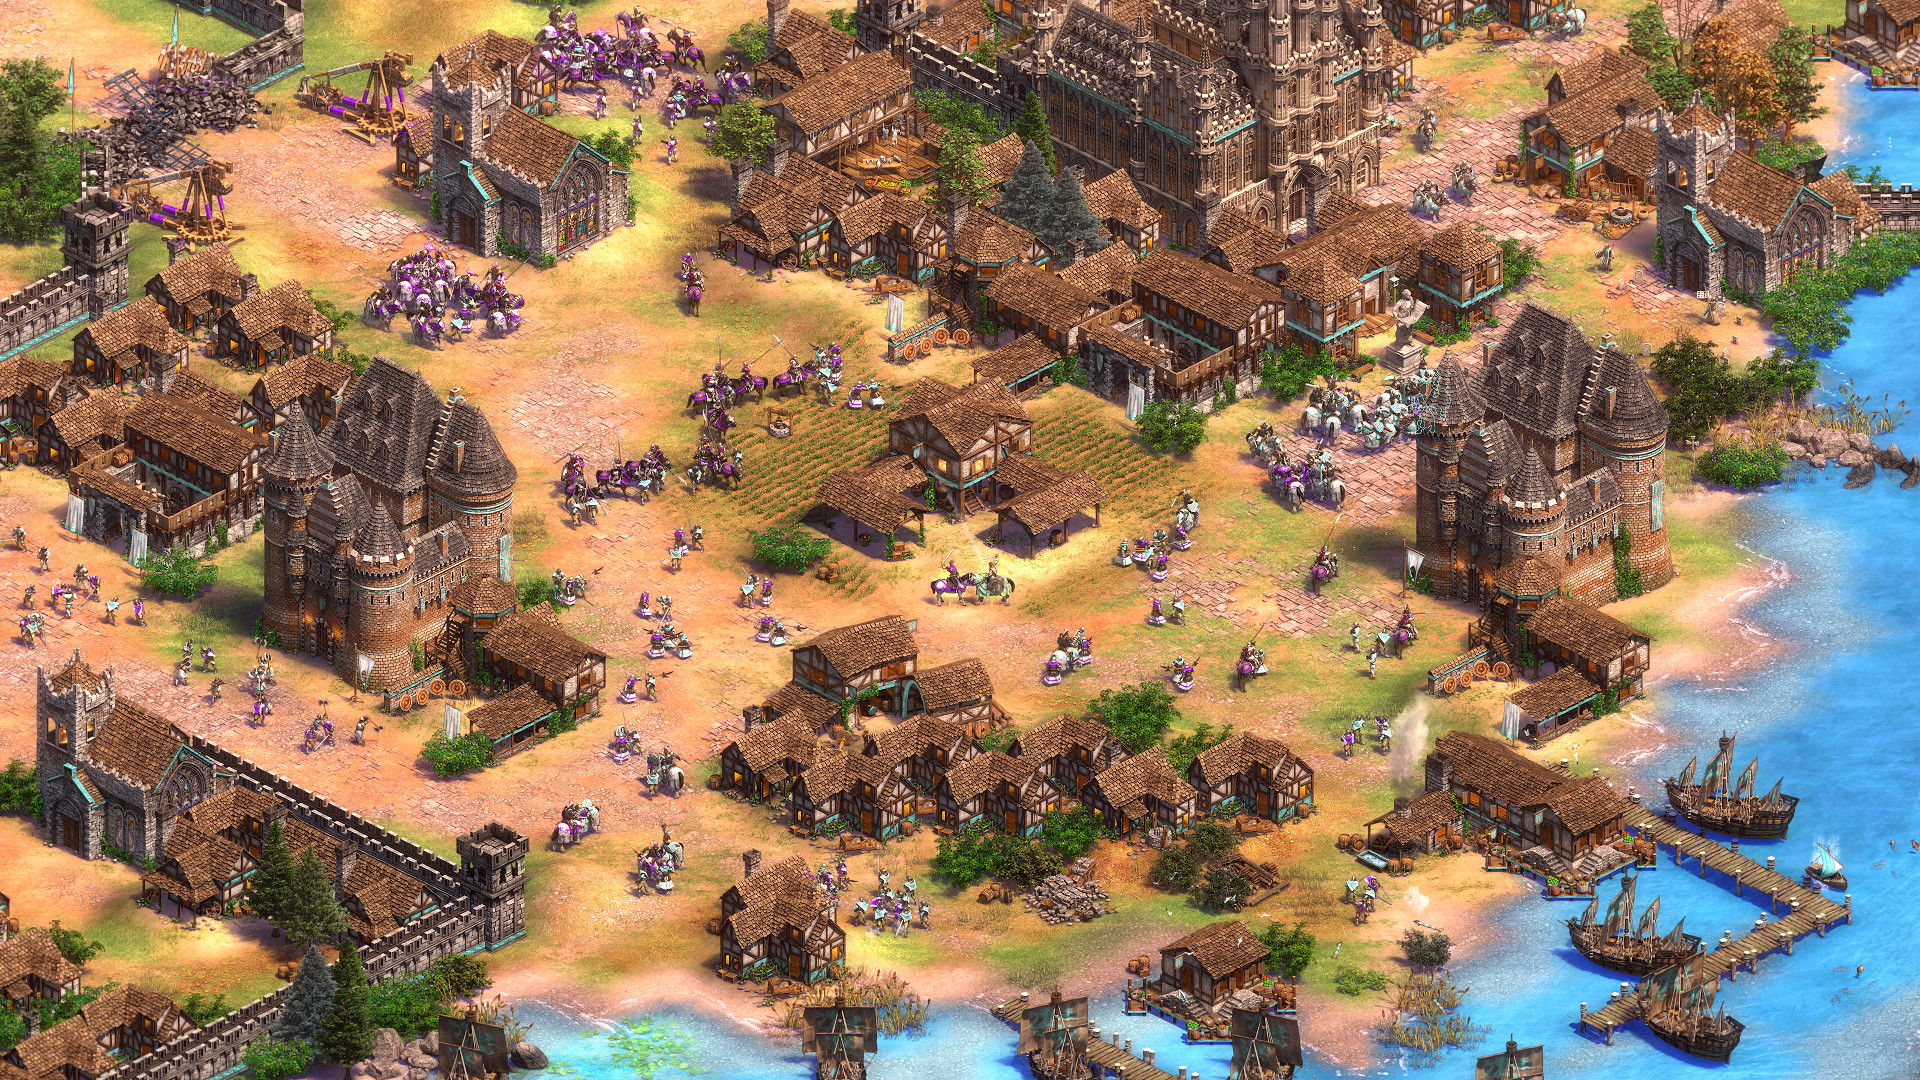 Age of Empires II: Definitive Edition - Lords of the West Featured Screenshot #1